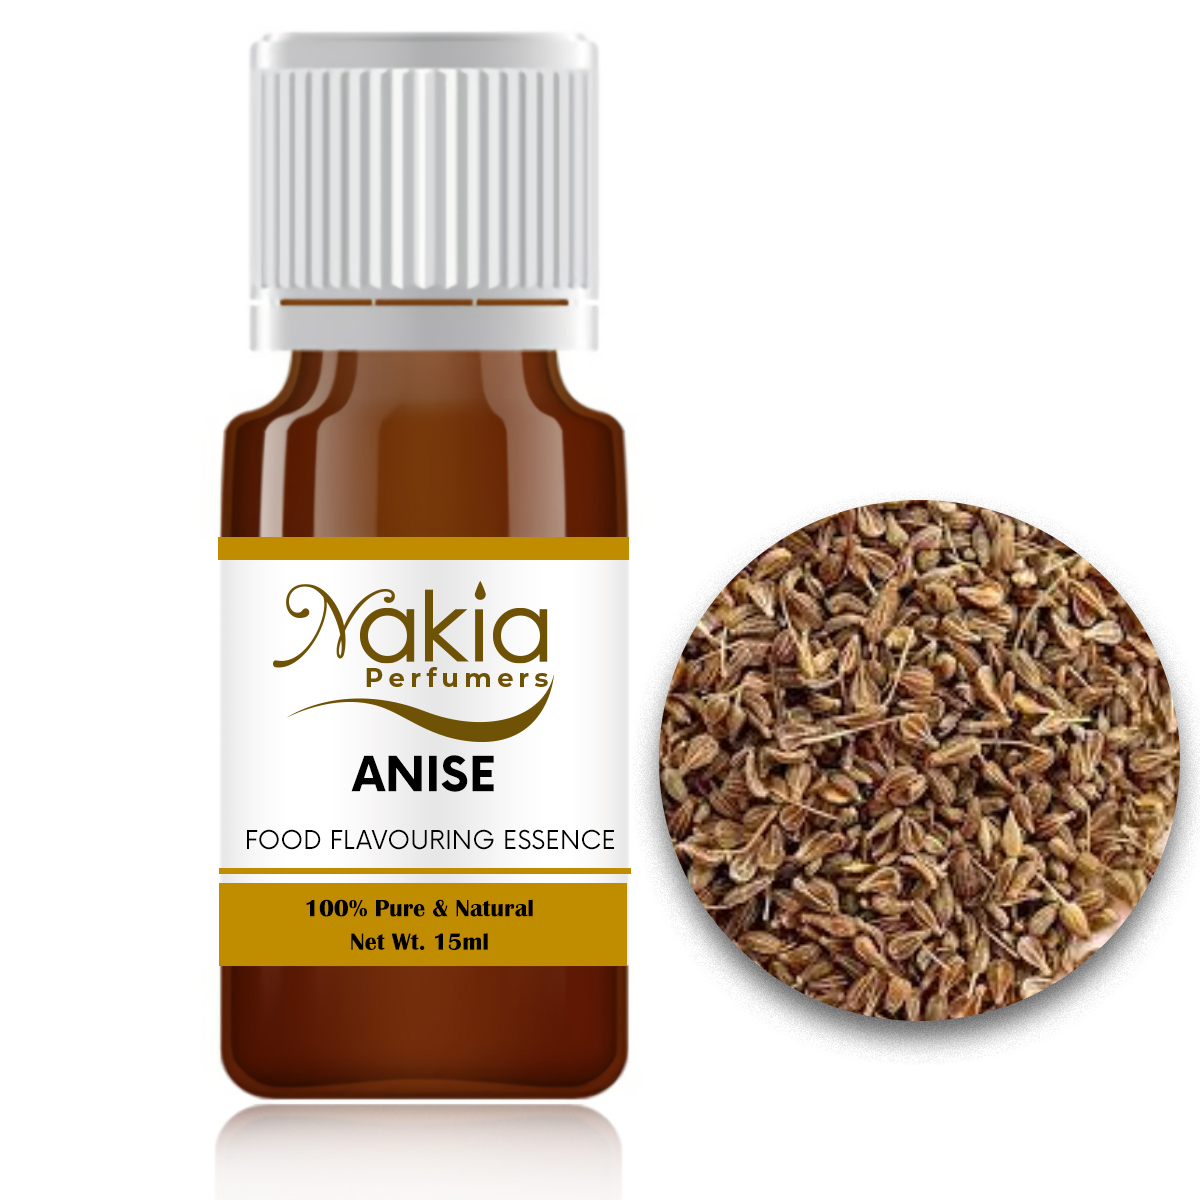 ANISE FOOD FLAVOURING ESSENCE